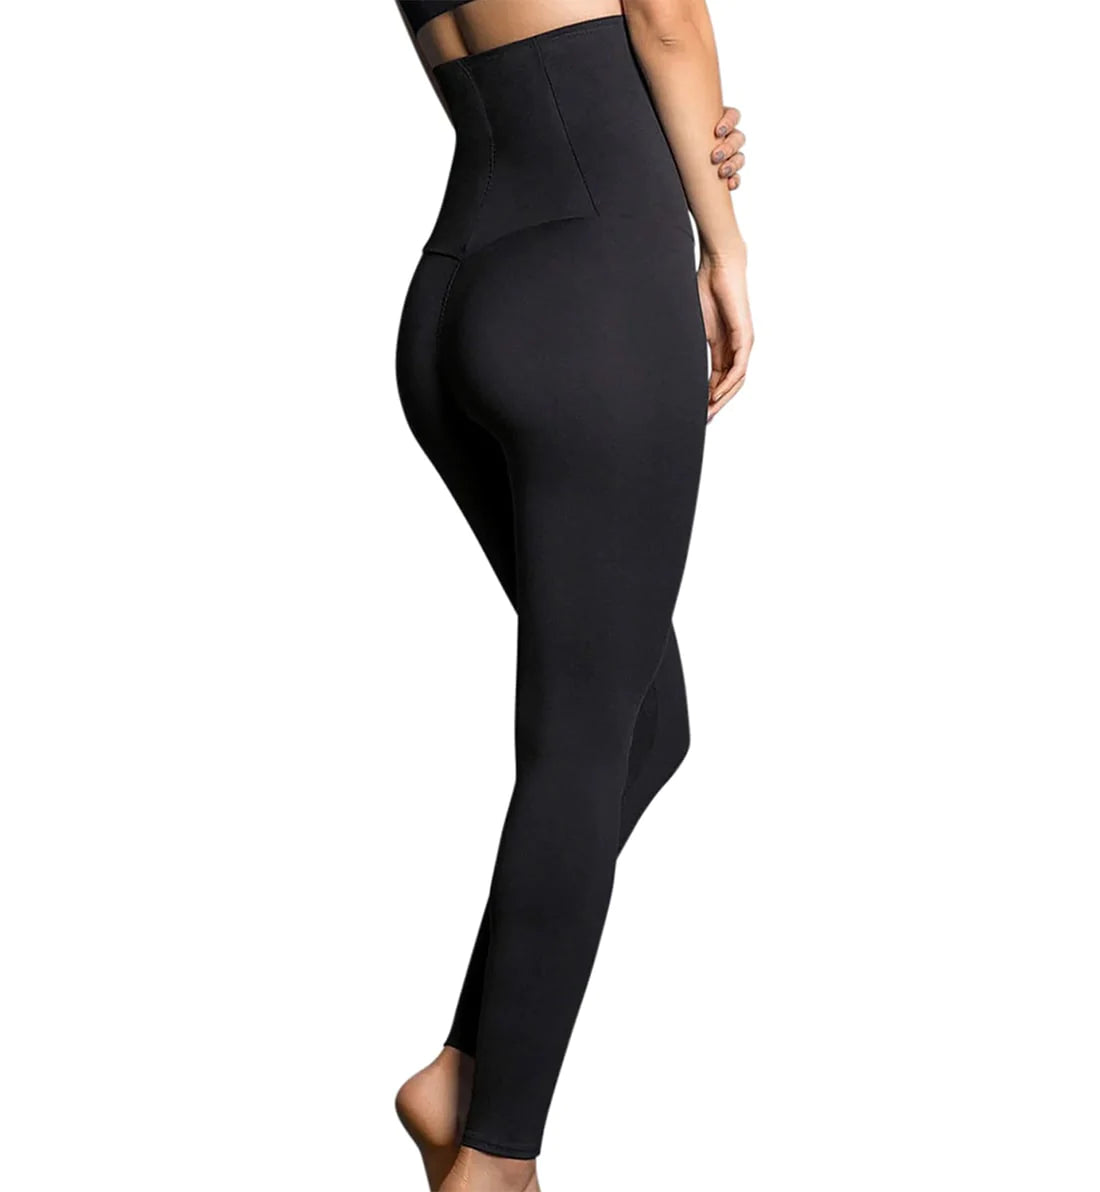 Extra High Waisted Firm Compression Legging - ActiveLife